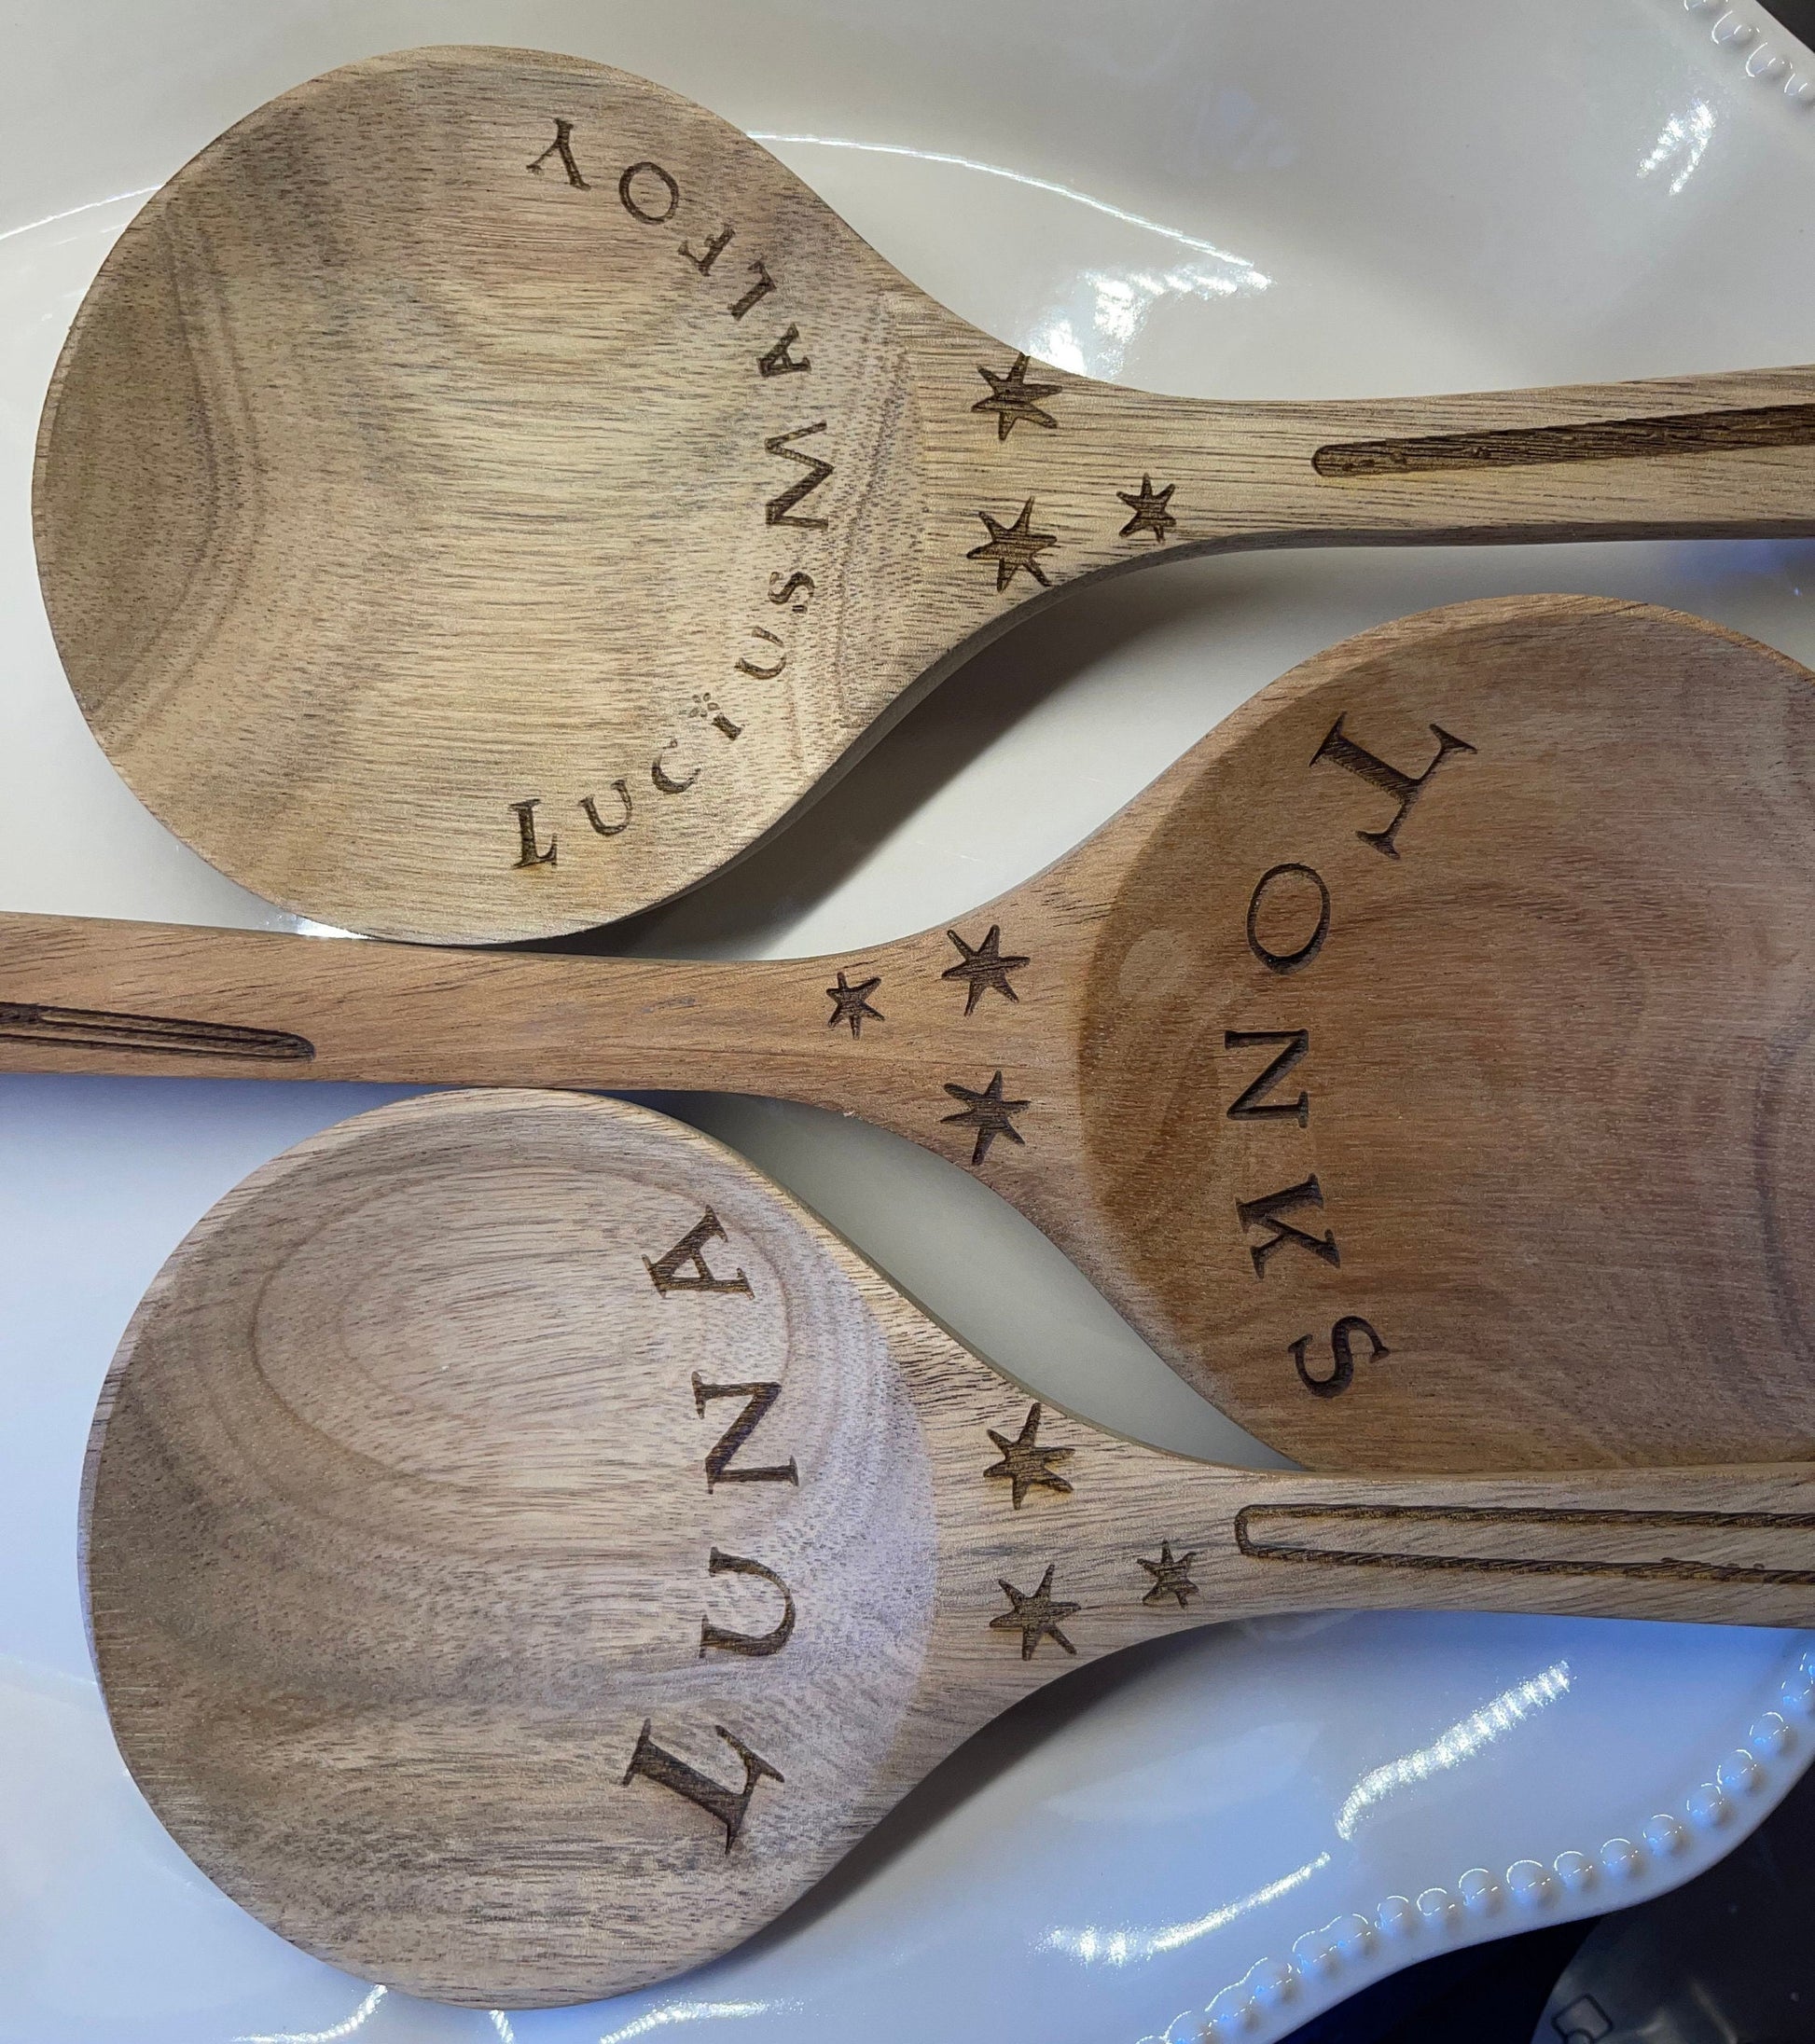 Personalized Wooden Ladle